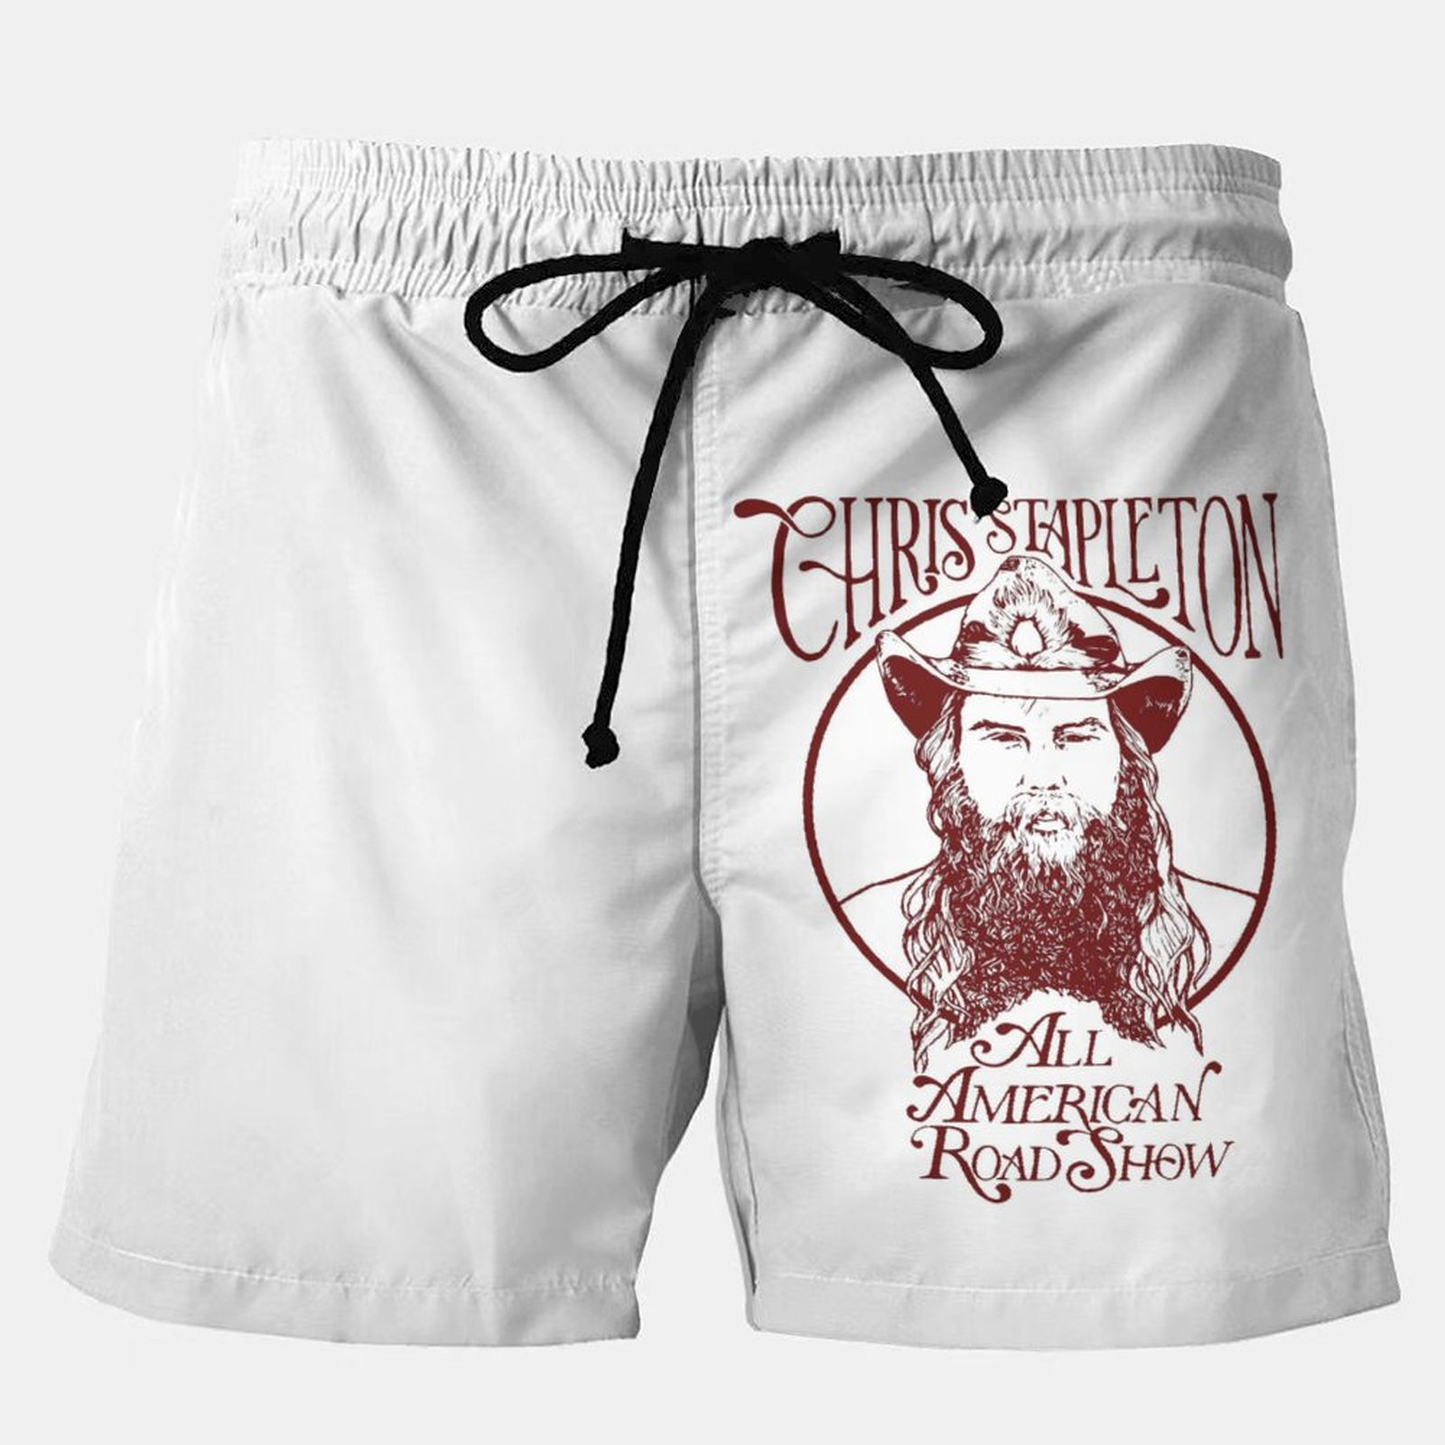 Chris Stapleton is coming to the United Supermarkets Arena Plus Size Shorts